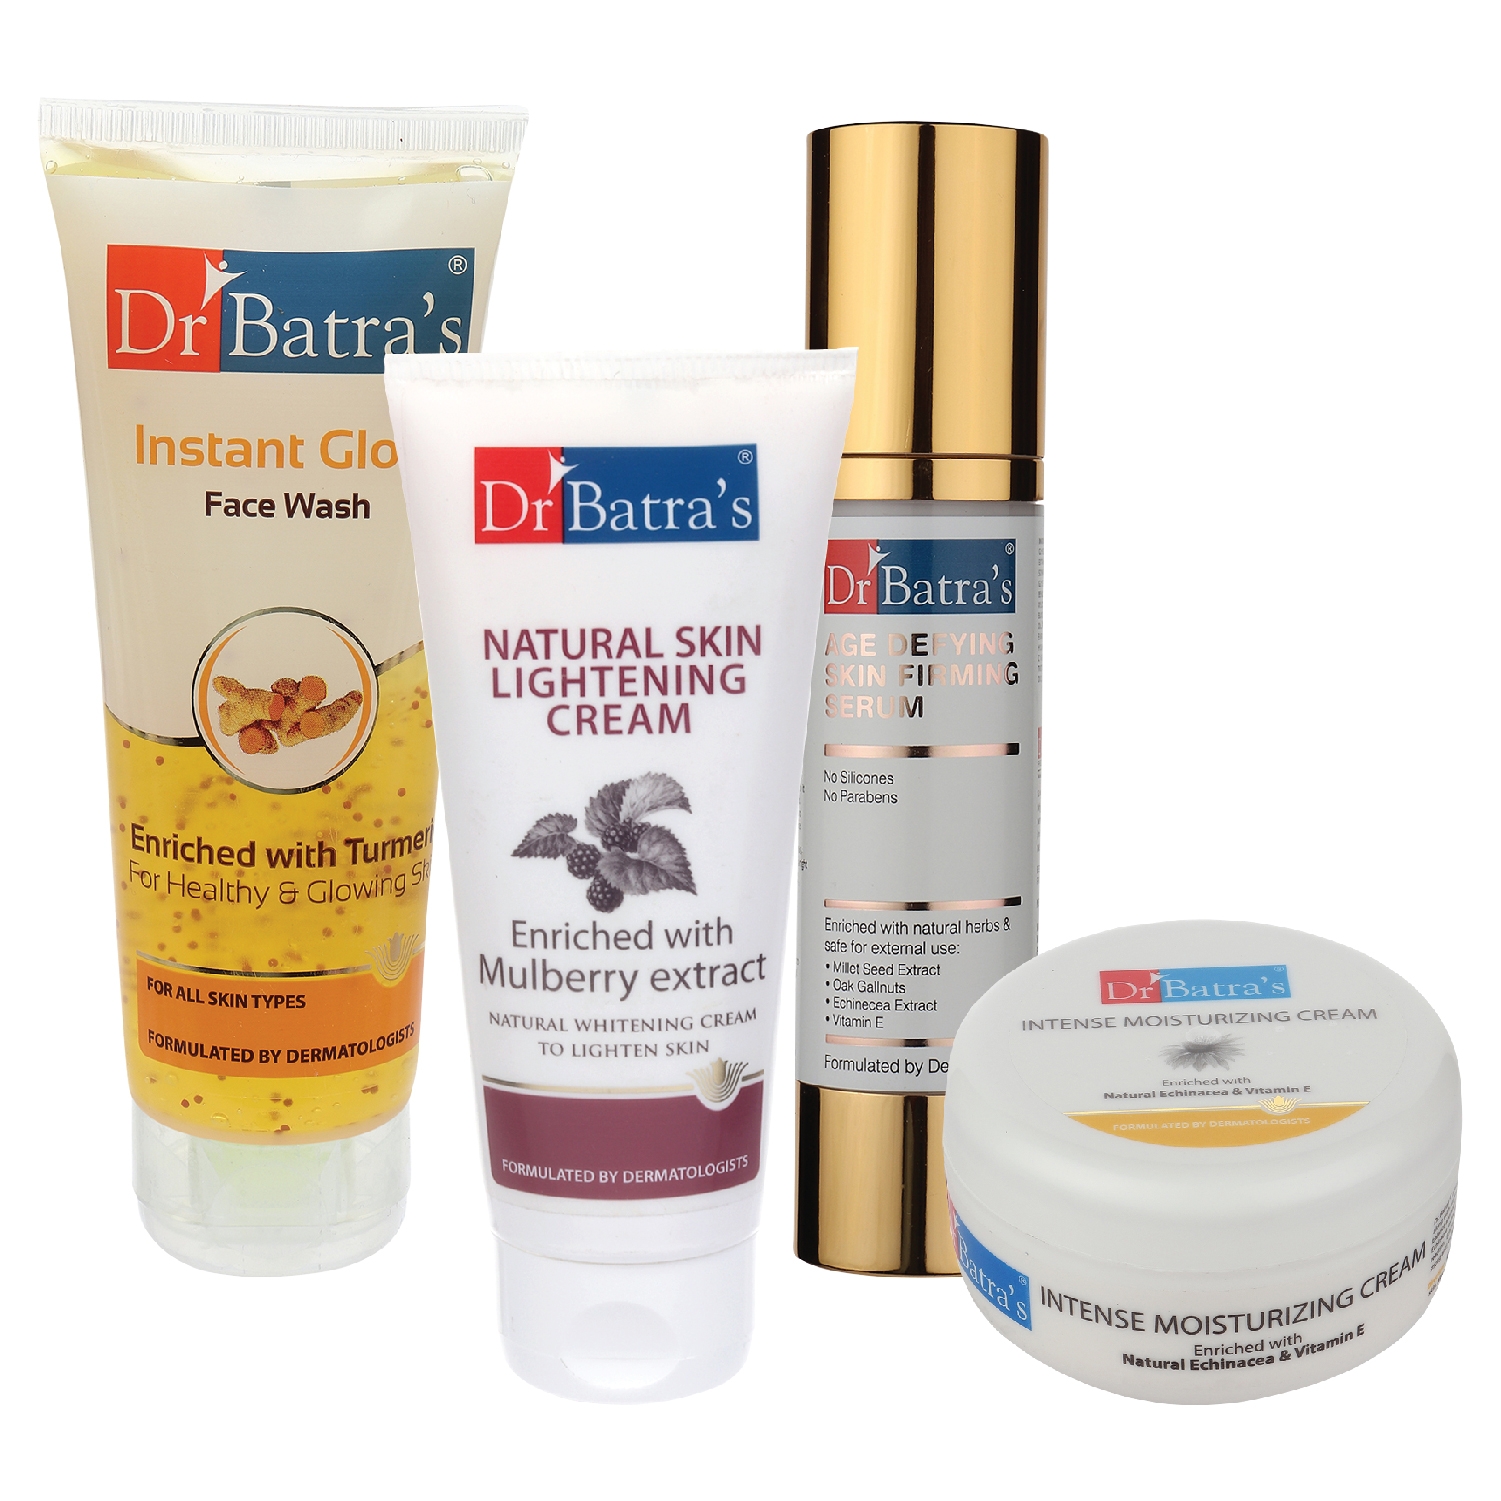 Dr Batra's | Dr Batra's Age Defying Skin Firming Serum - 50 G, Face Wash Instant Glow - 100 gm, Natural Skin Lightening Cream - 100 gm and Intense Moisturizing Cream -100 G (Pack of 4)